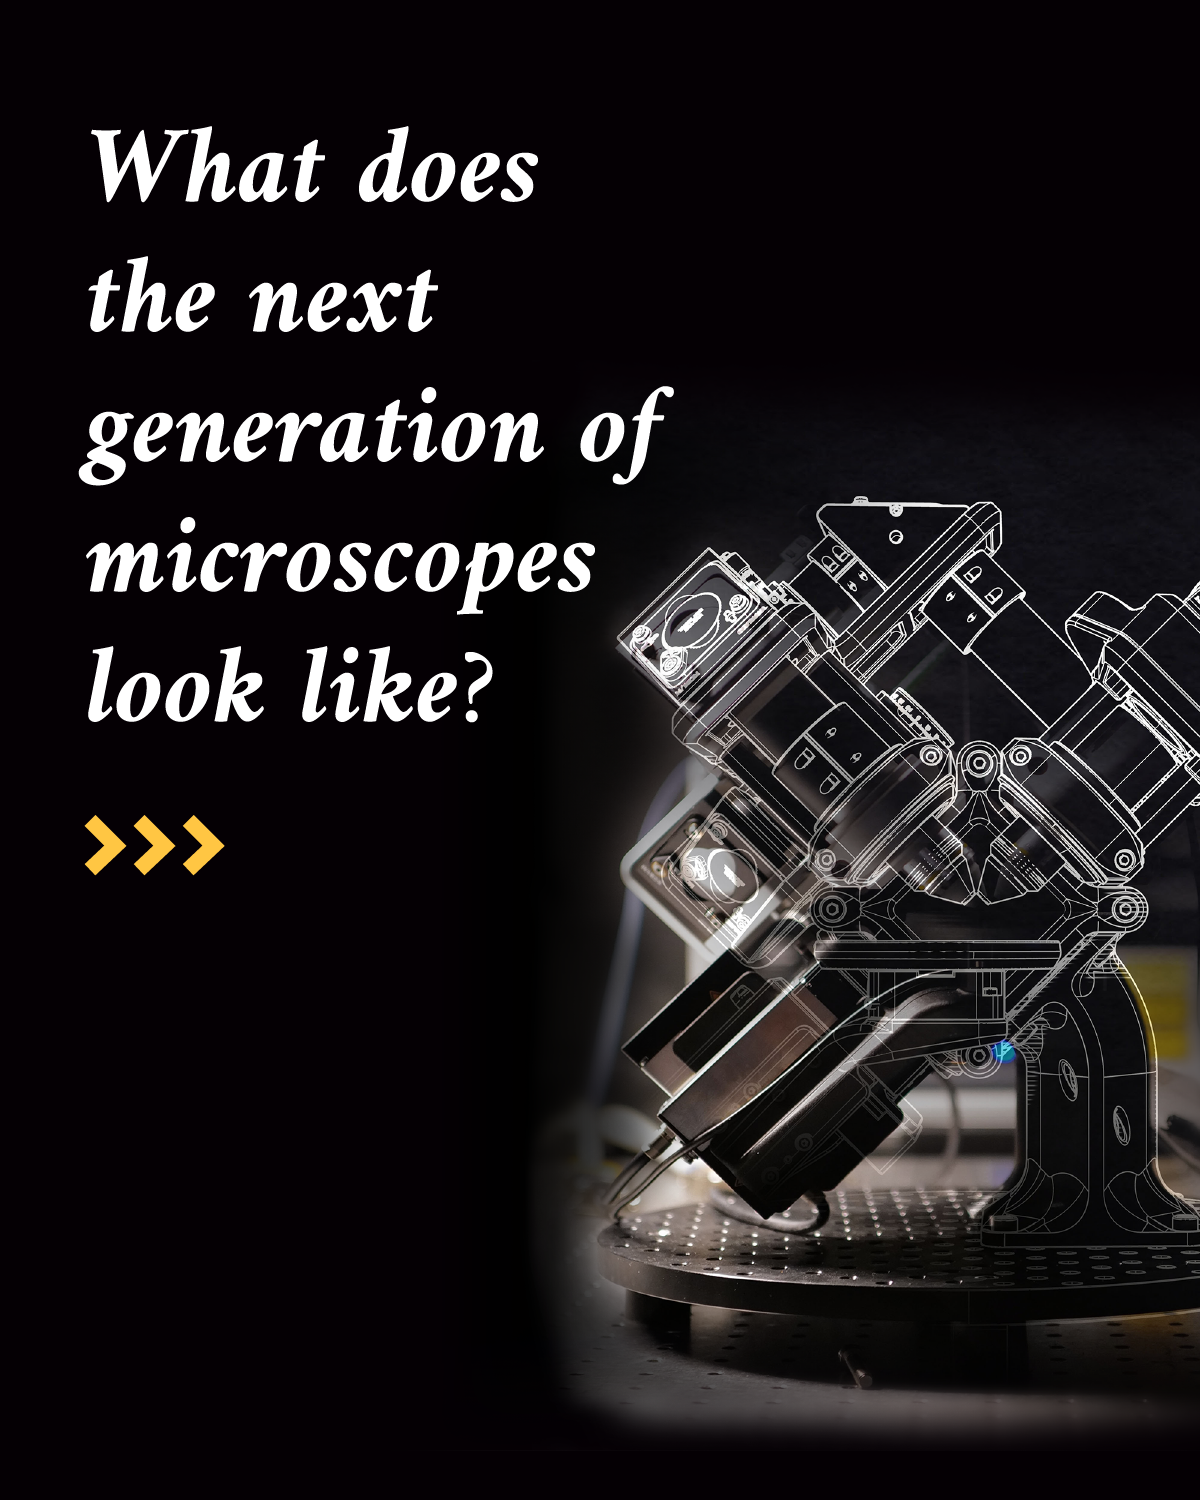 Infographic reads “What does the next generation of microscopes look like?” Accompanying the text is a photo of a microscope with white lines drawn to show the many parts that make up the inside of the microscope.